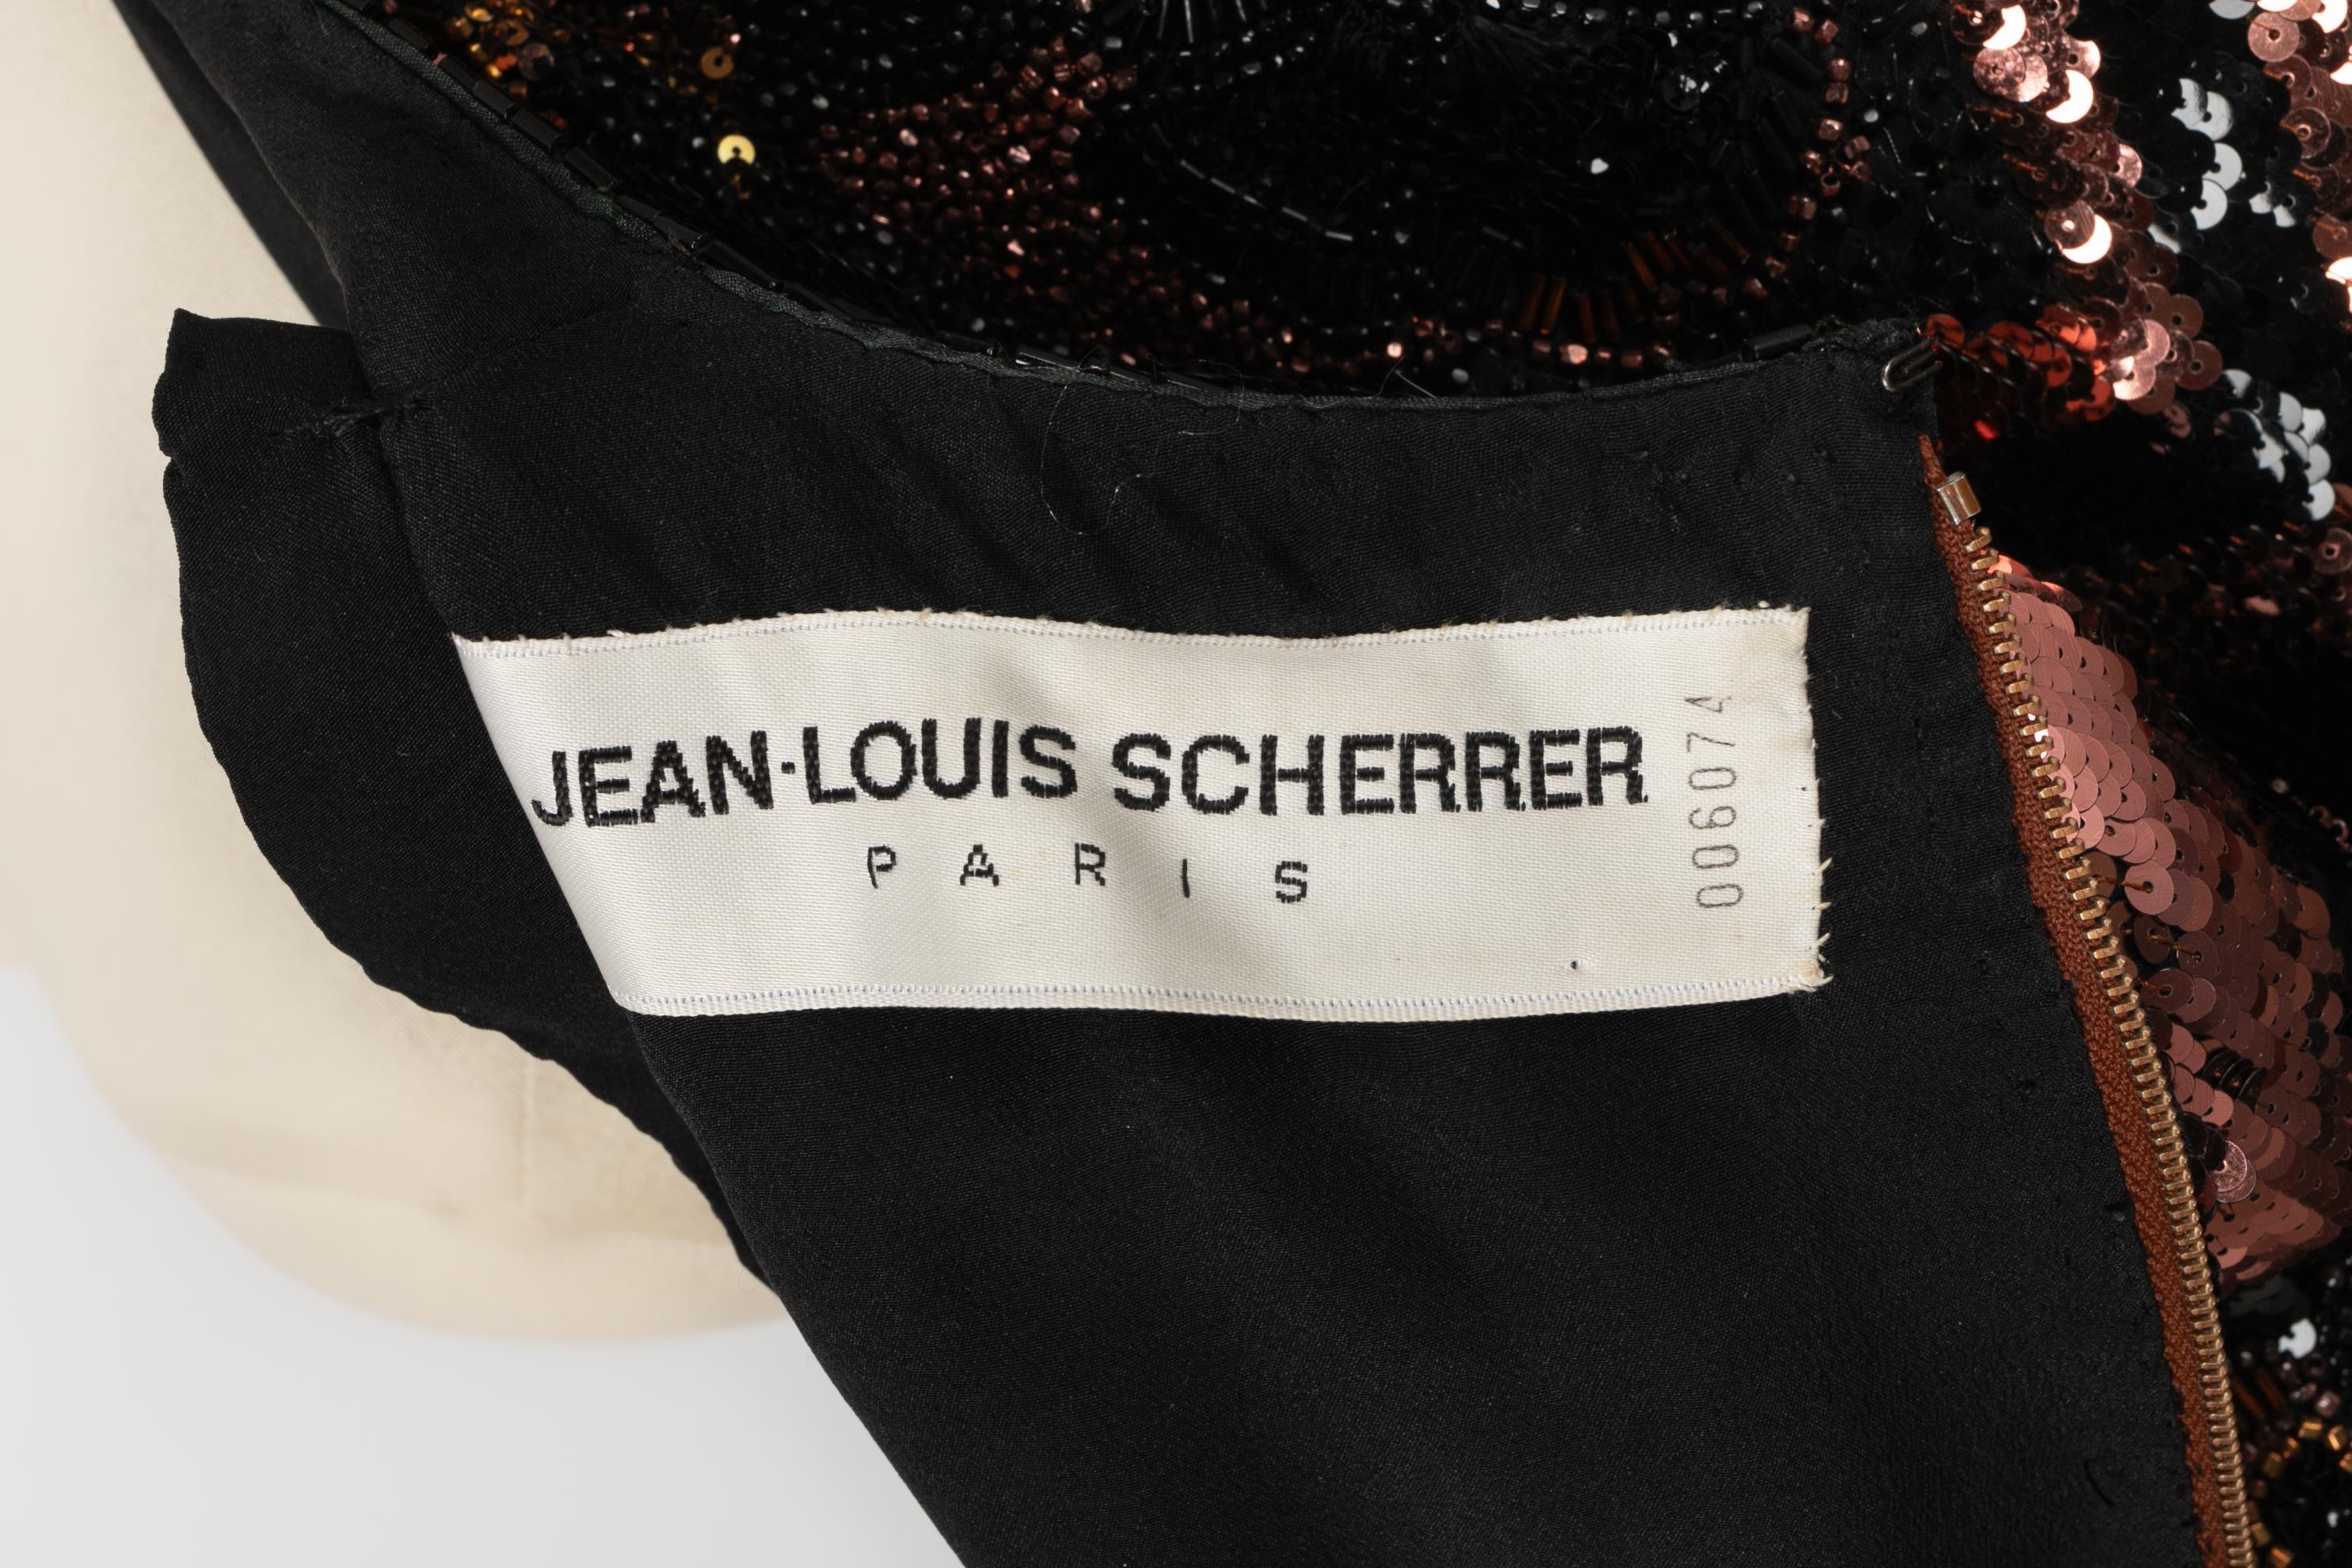 Jean-Louis Scherrer Tunic Dress Embroidered with Pearls & Sequins Haute Couture For Sale 2